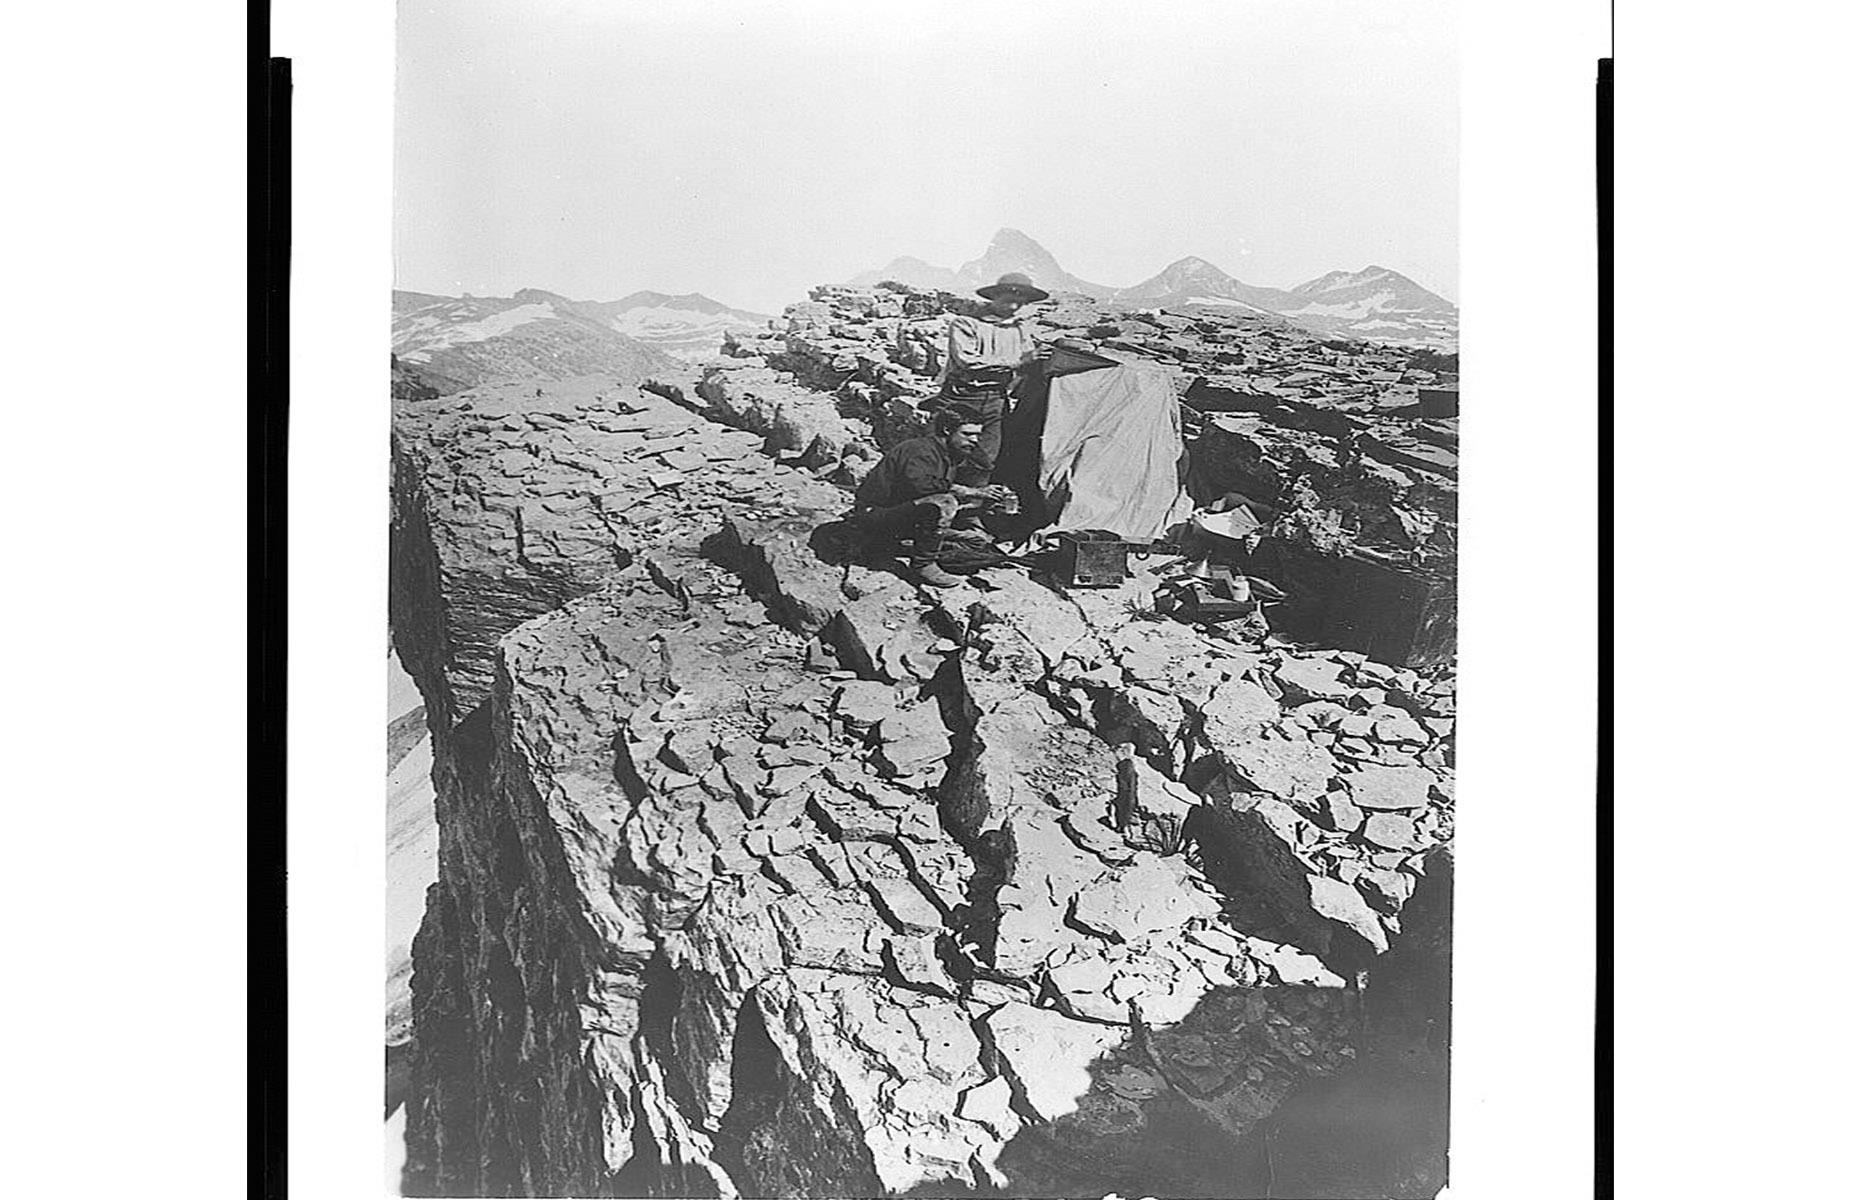 Among Hayden's team was William Henry Jackson, an American photographer who's become known as the first to capture the park on camera. His stirring photographs went some way to convincing officials to establish the national park. He's snapped here on a mountaintop surrounded by his equipment.